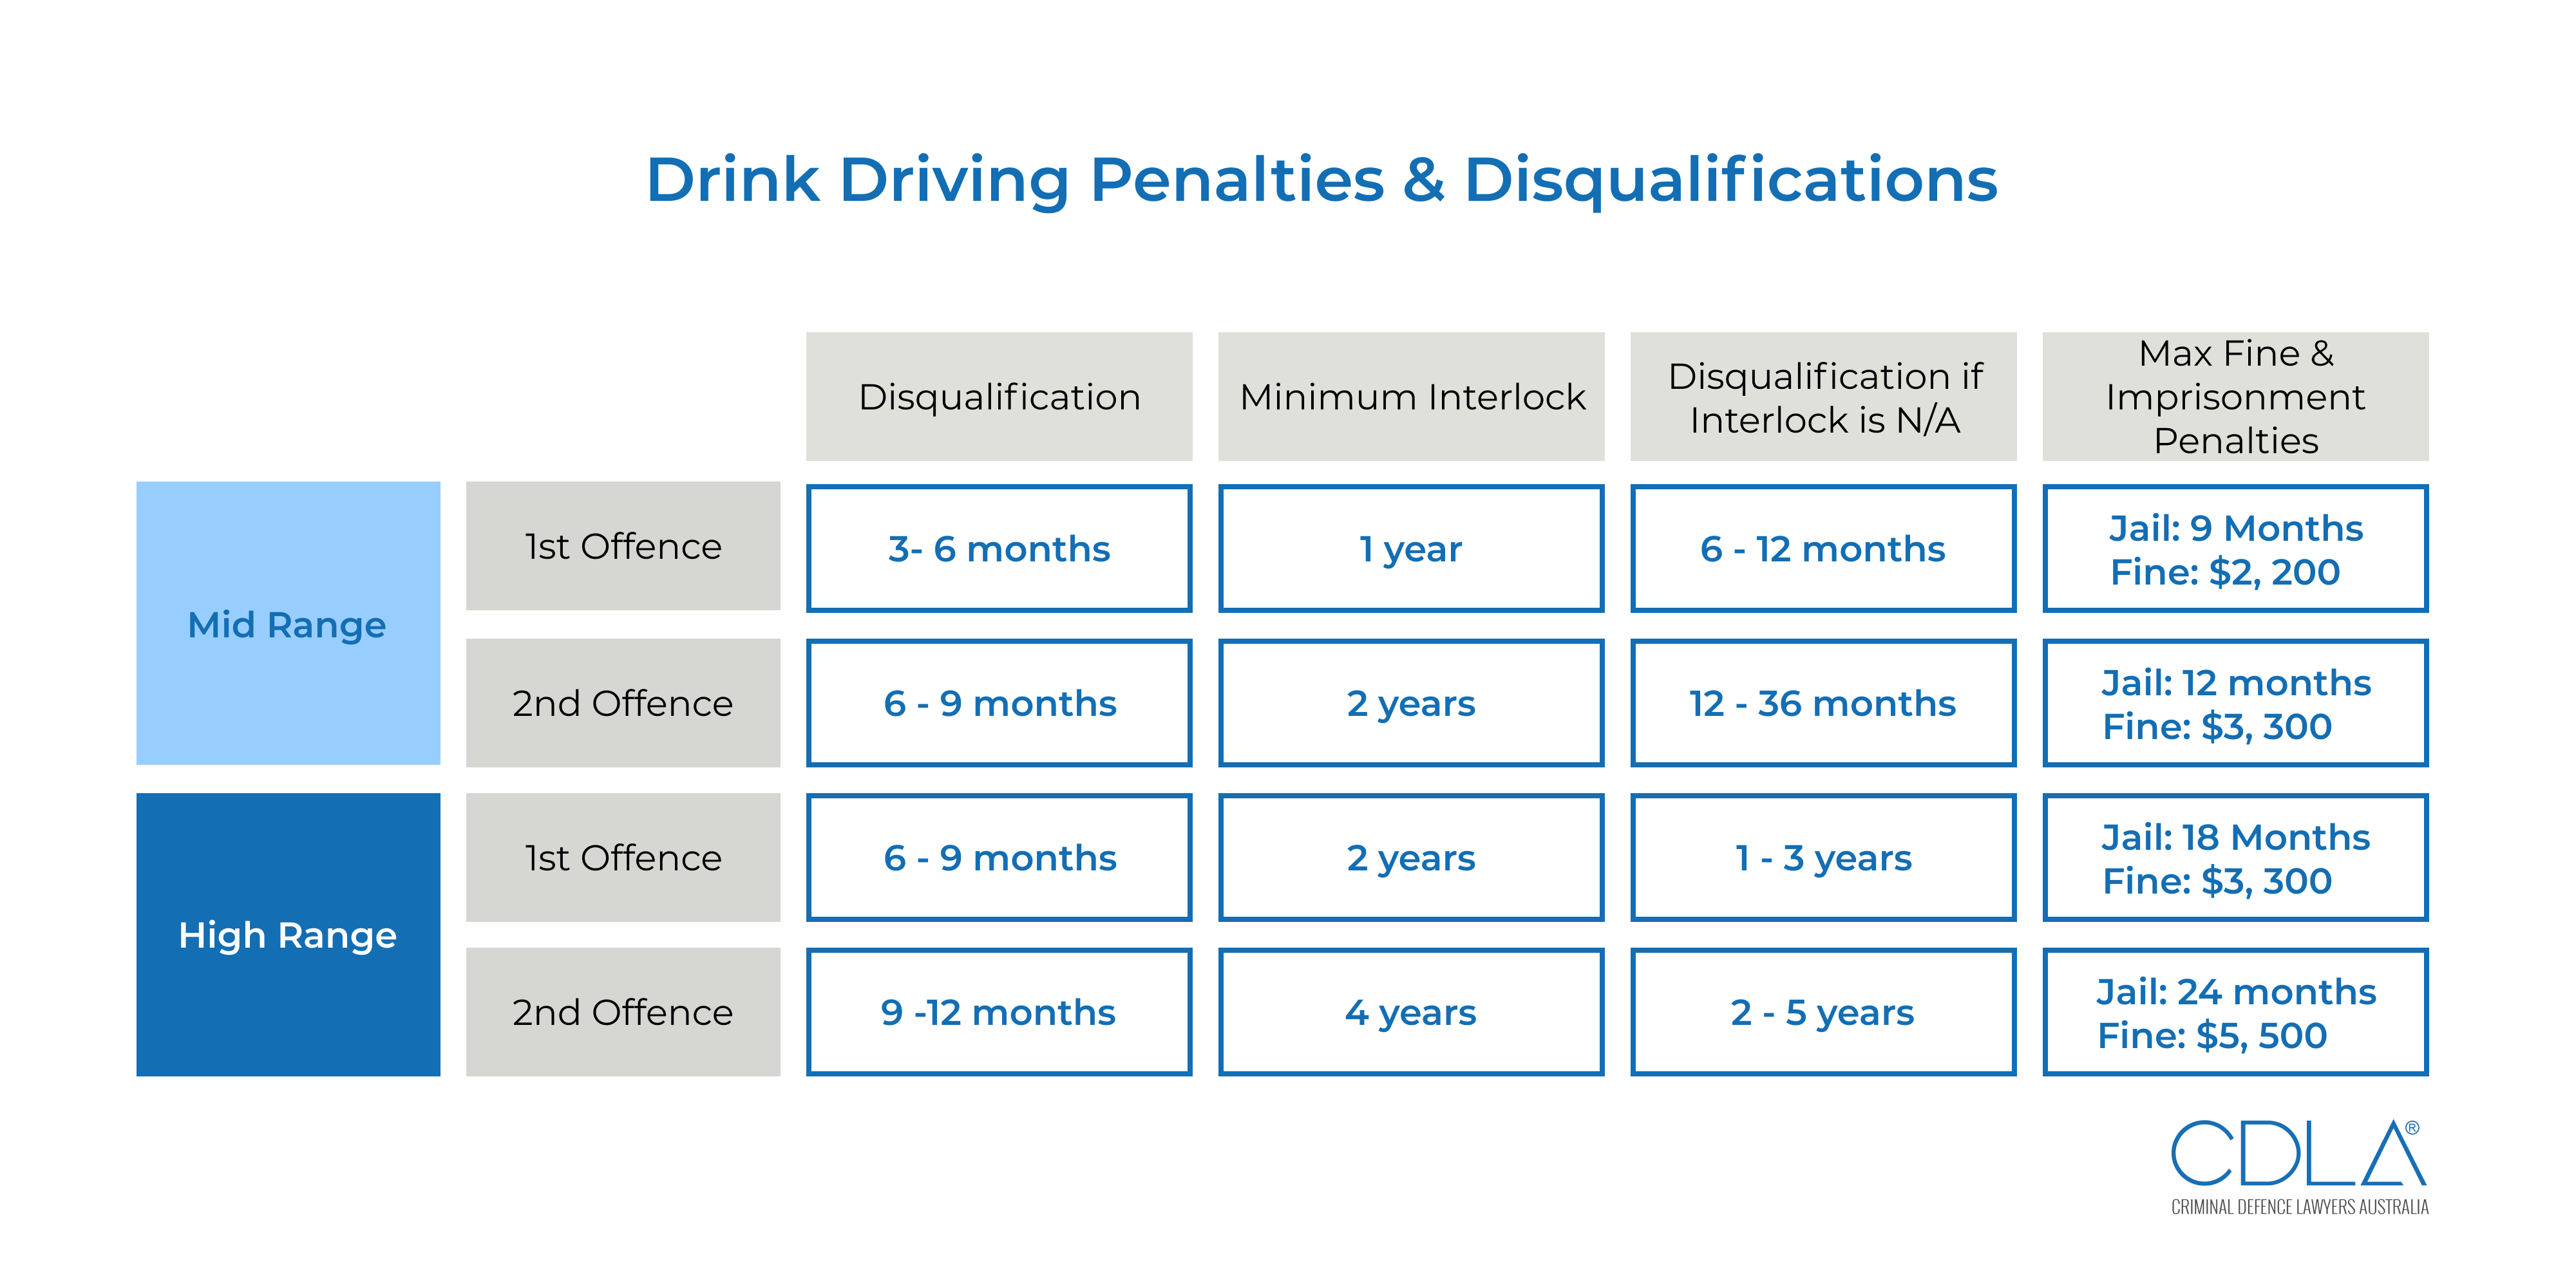 why should drunk drivers be imprisoned on the first offense